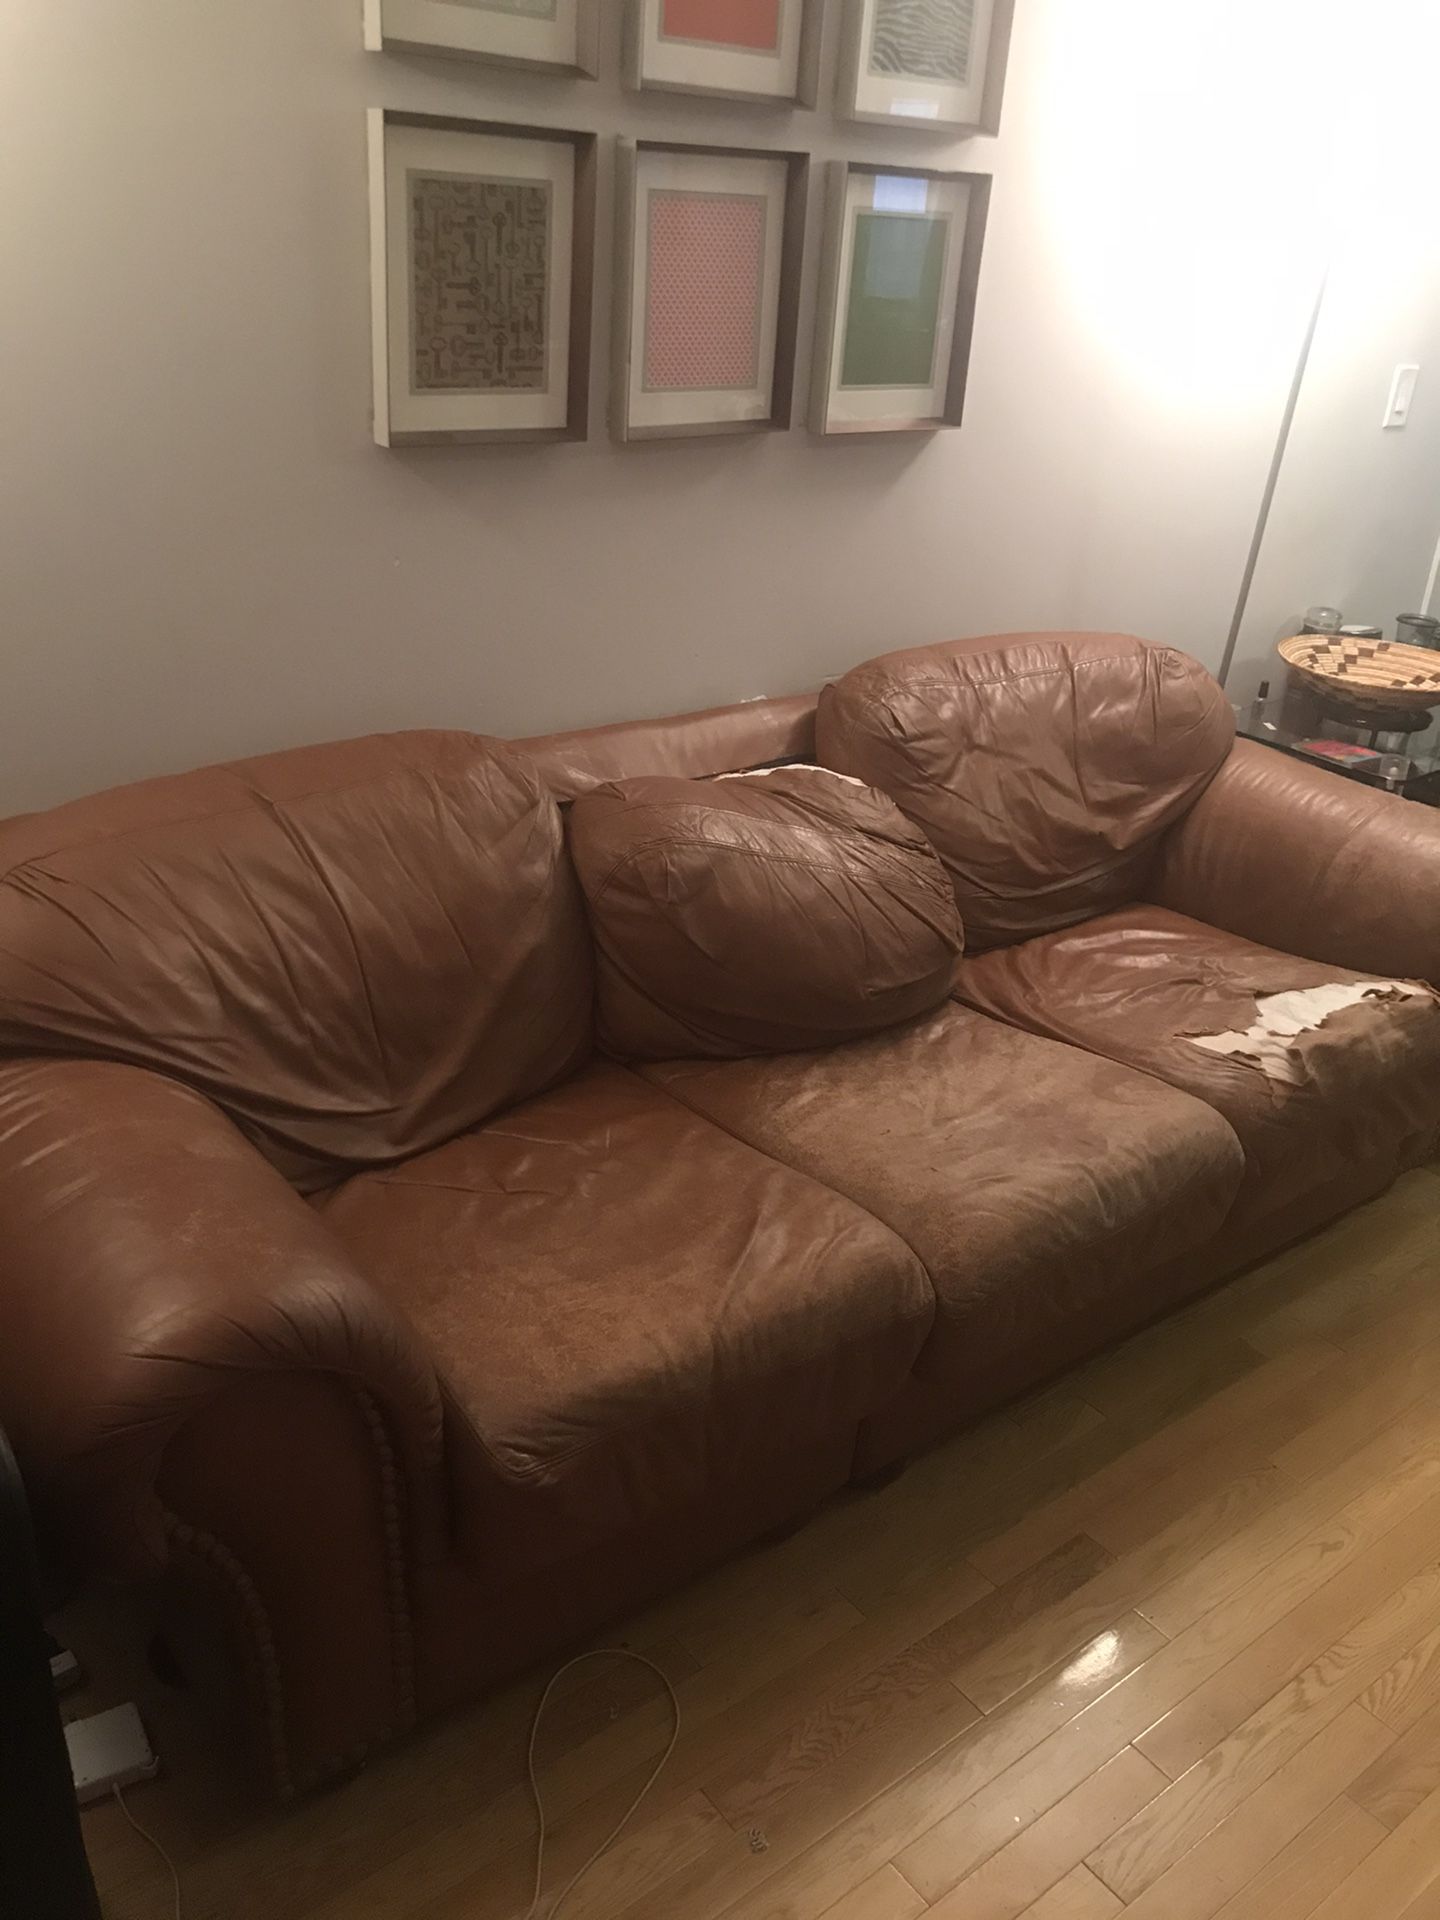 FREE LEATHER COUCH!!